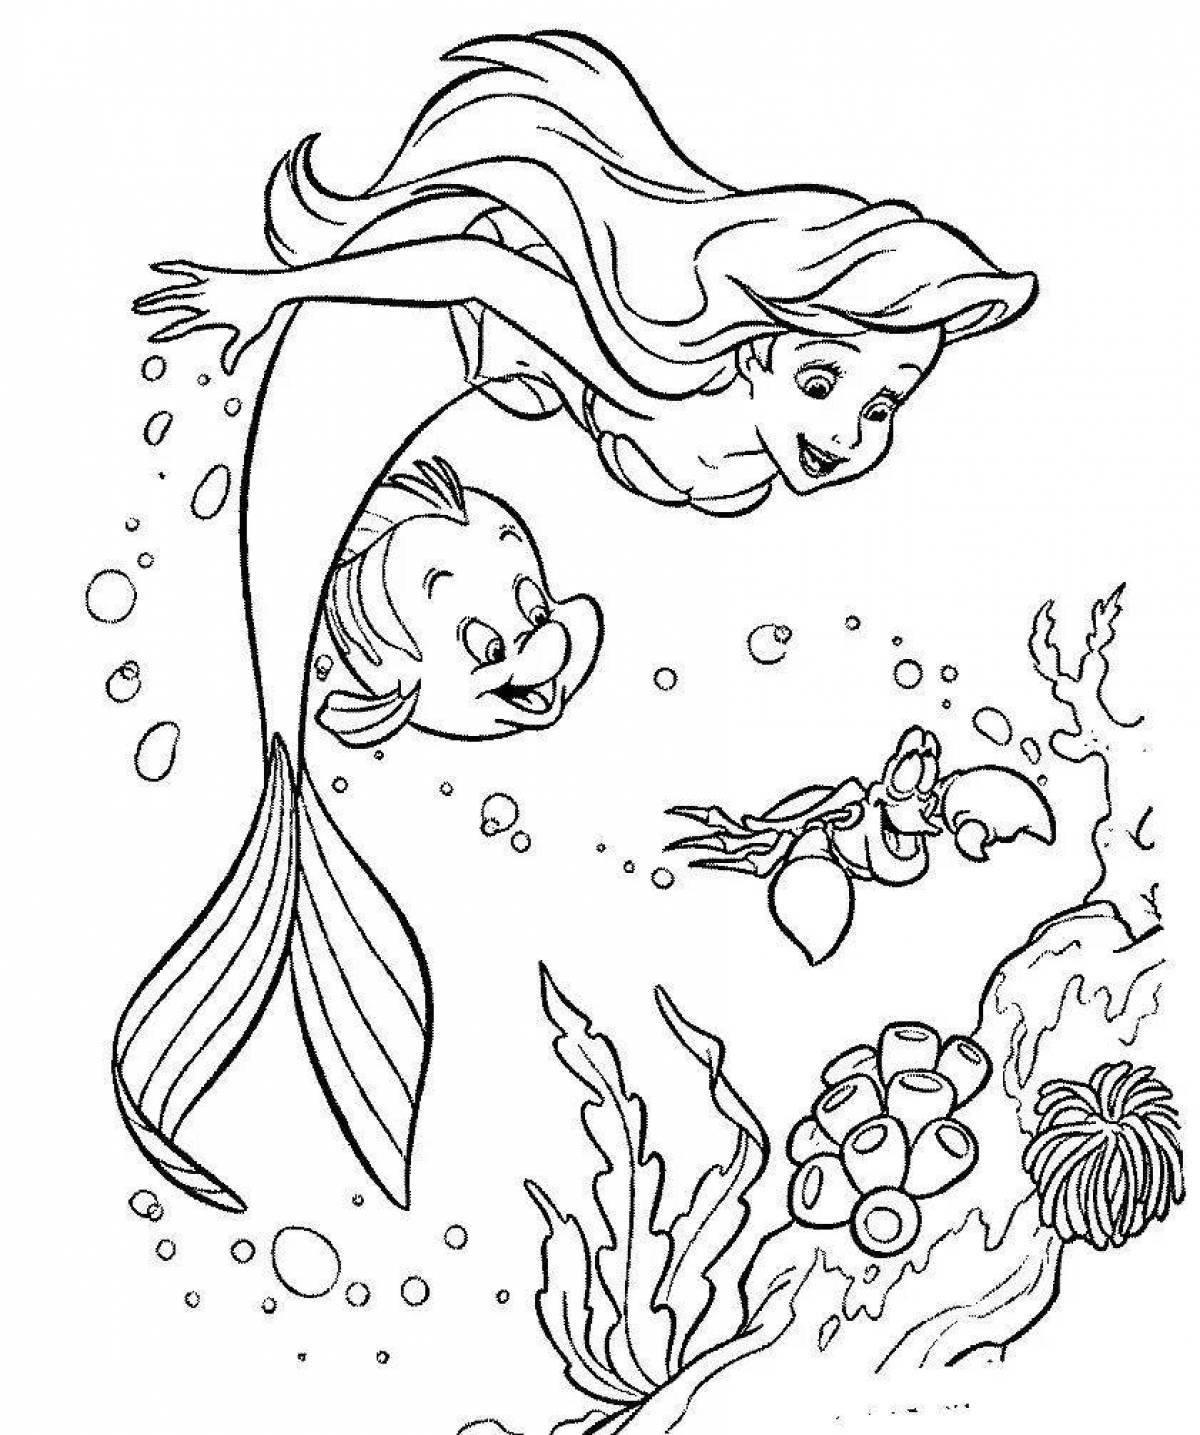 Gorgeous ariel little mermaid coloring book for kids